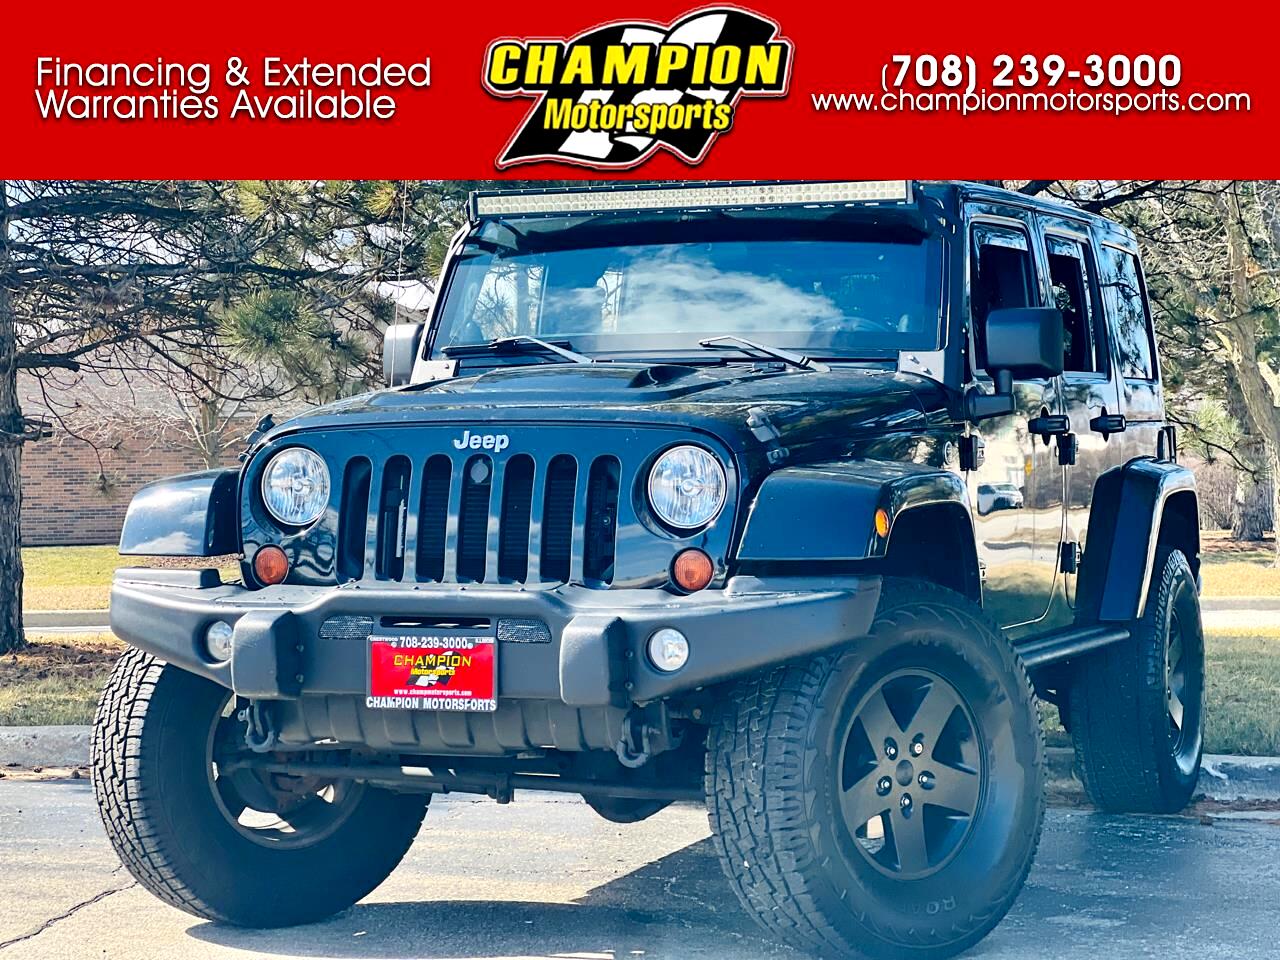 2012 Jeep Wrangler Unlimited 4WD 4dr Call of Duty MW3 *Ltd Avail*